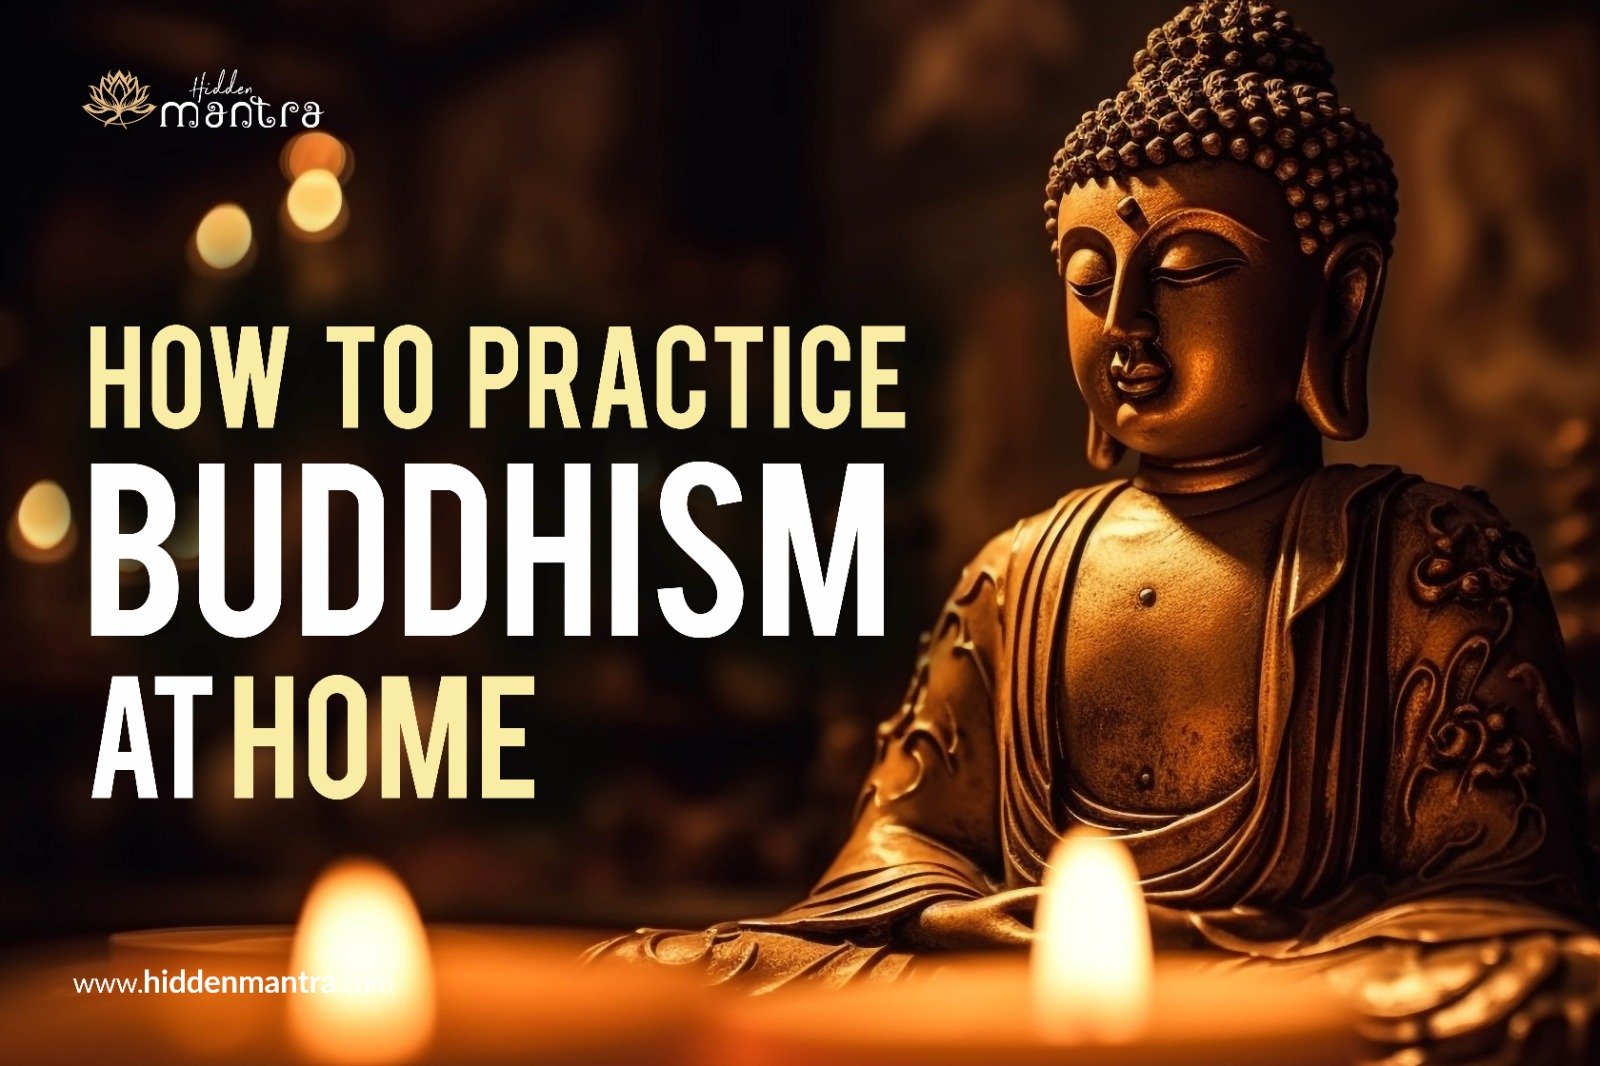 How to Practice Buddhism at Home - 8 Peaceful Activities